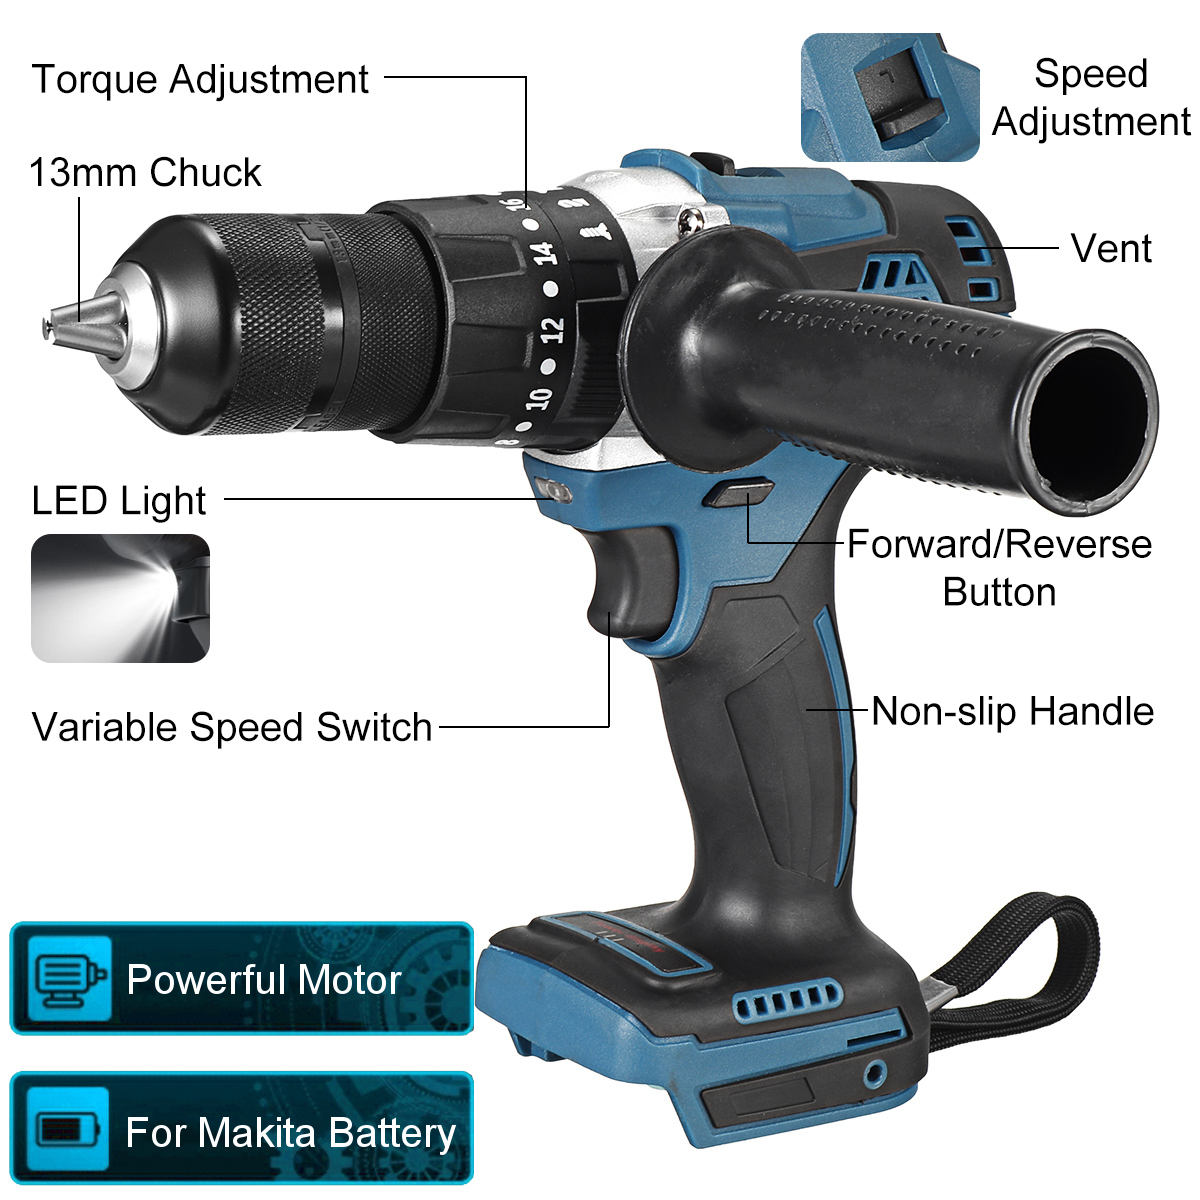 13mm-Chuck-Self-Lock-3-In-1-Brushless-Electric-Drill-20-Torque-2-Speed-Rechargeable-Power-Drills-Dri-1880980-4